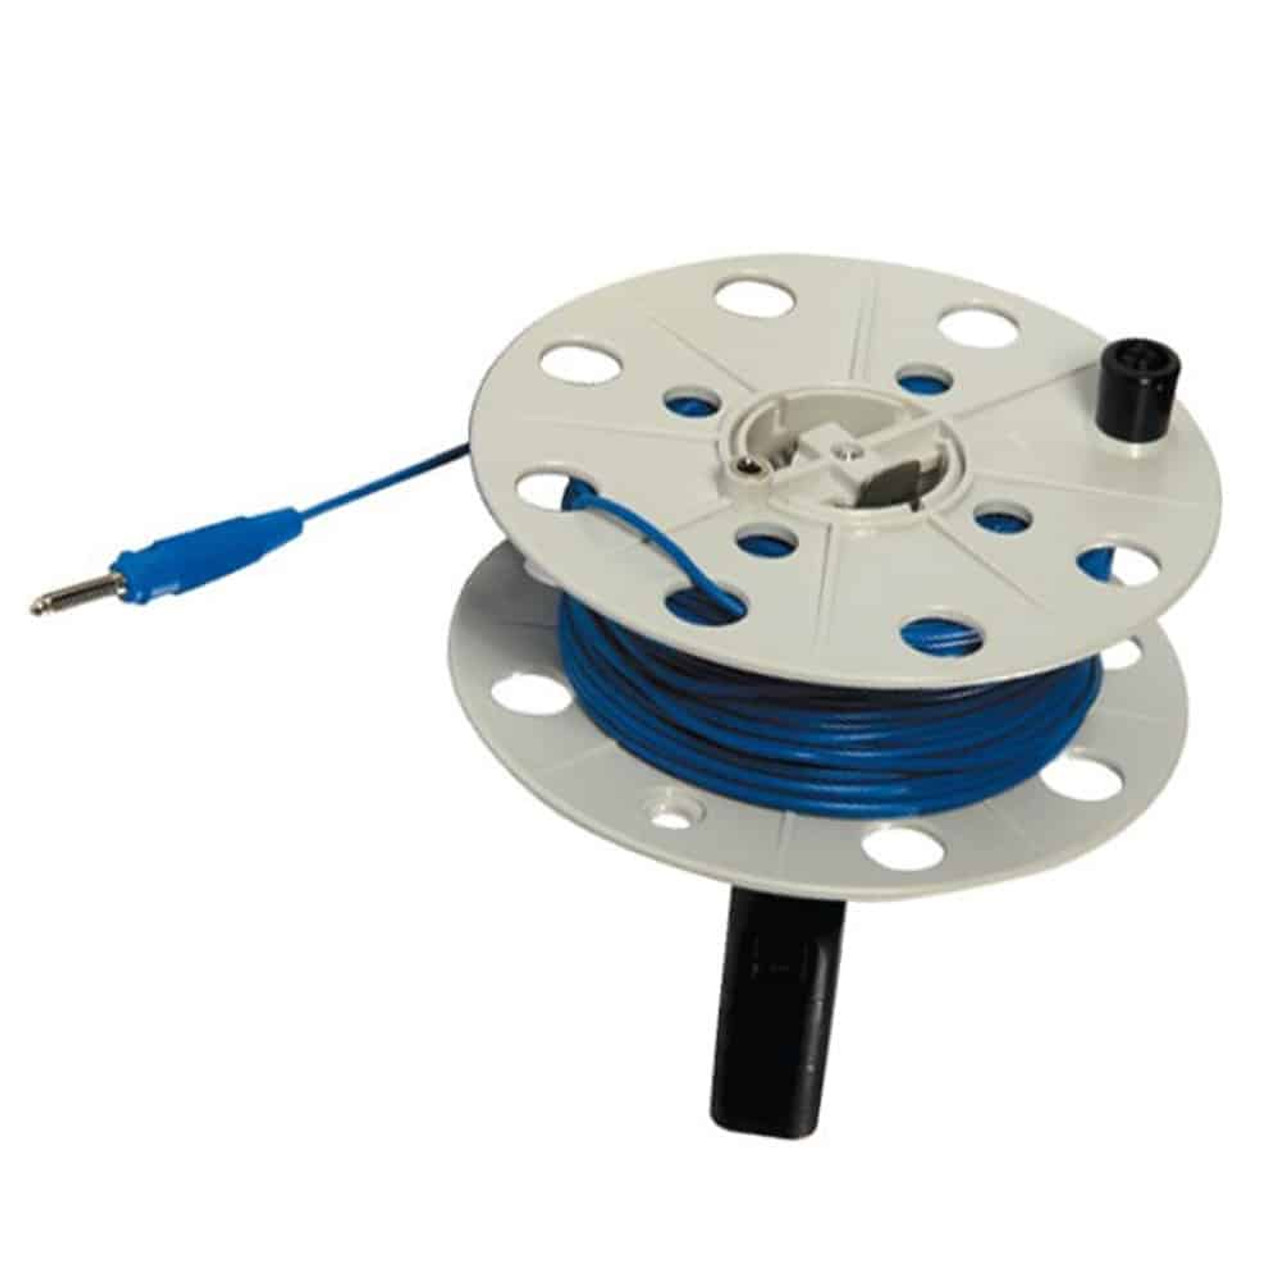 Tronic 3 Core Cable Extension Reel - 50 Meter